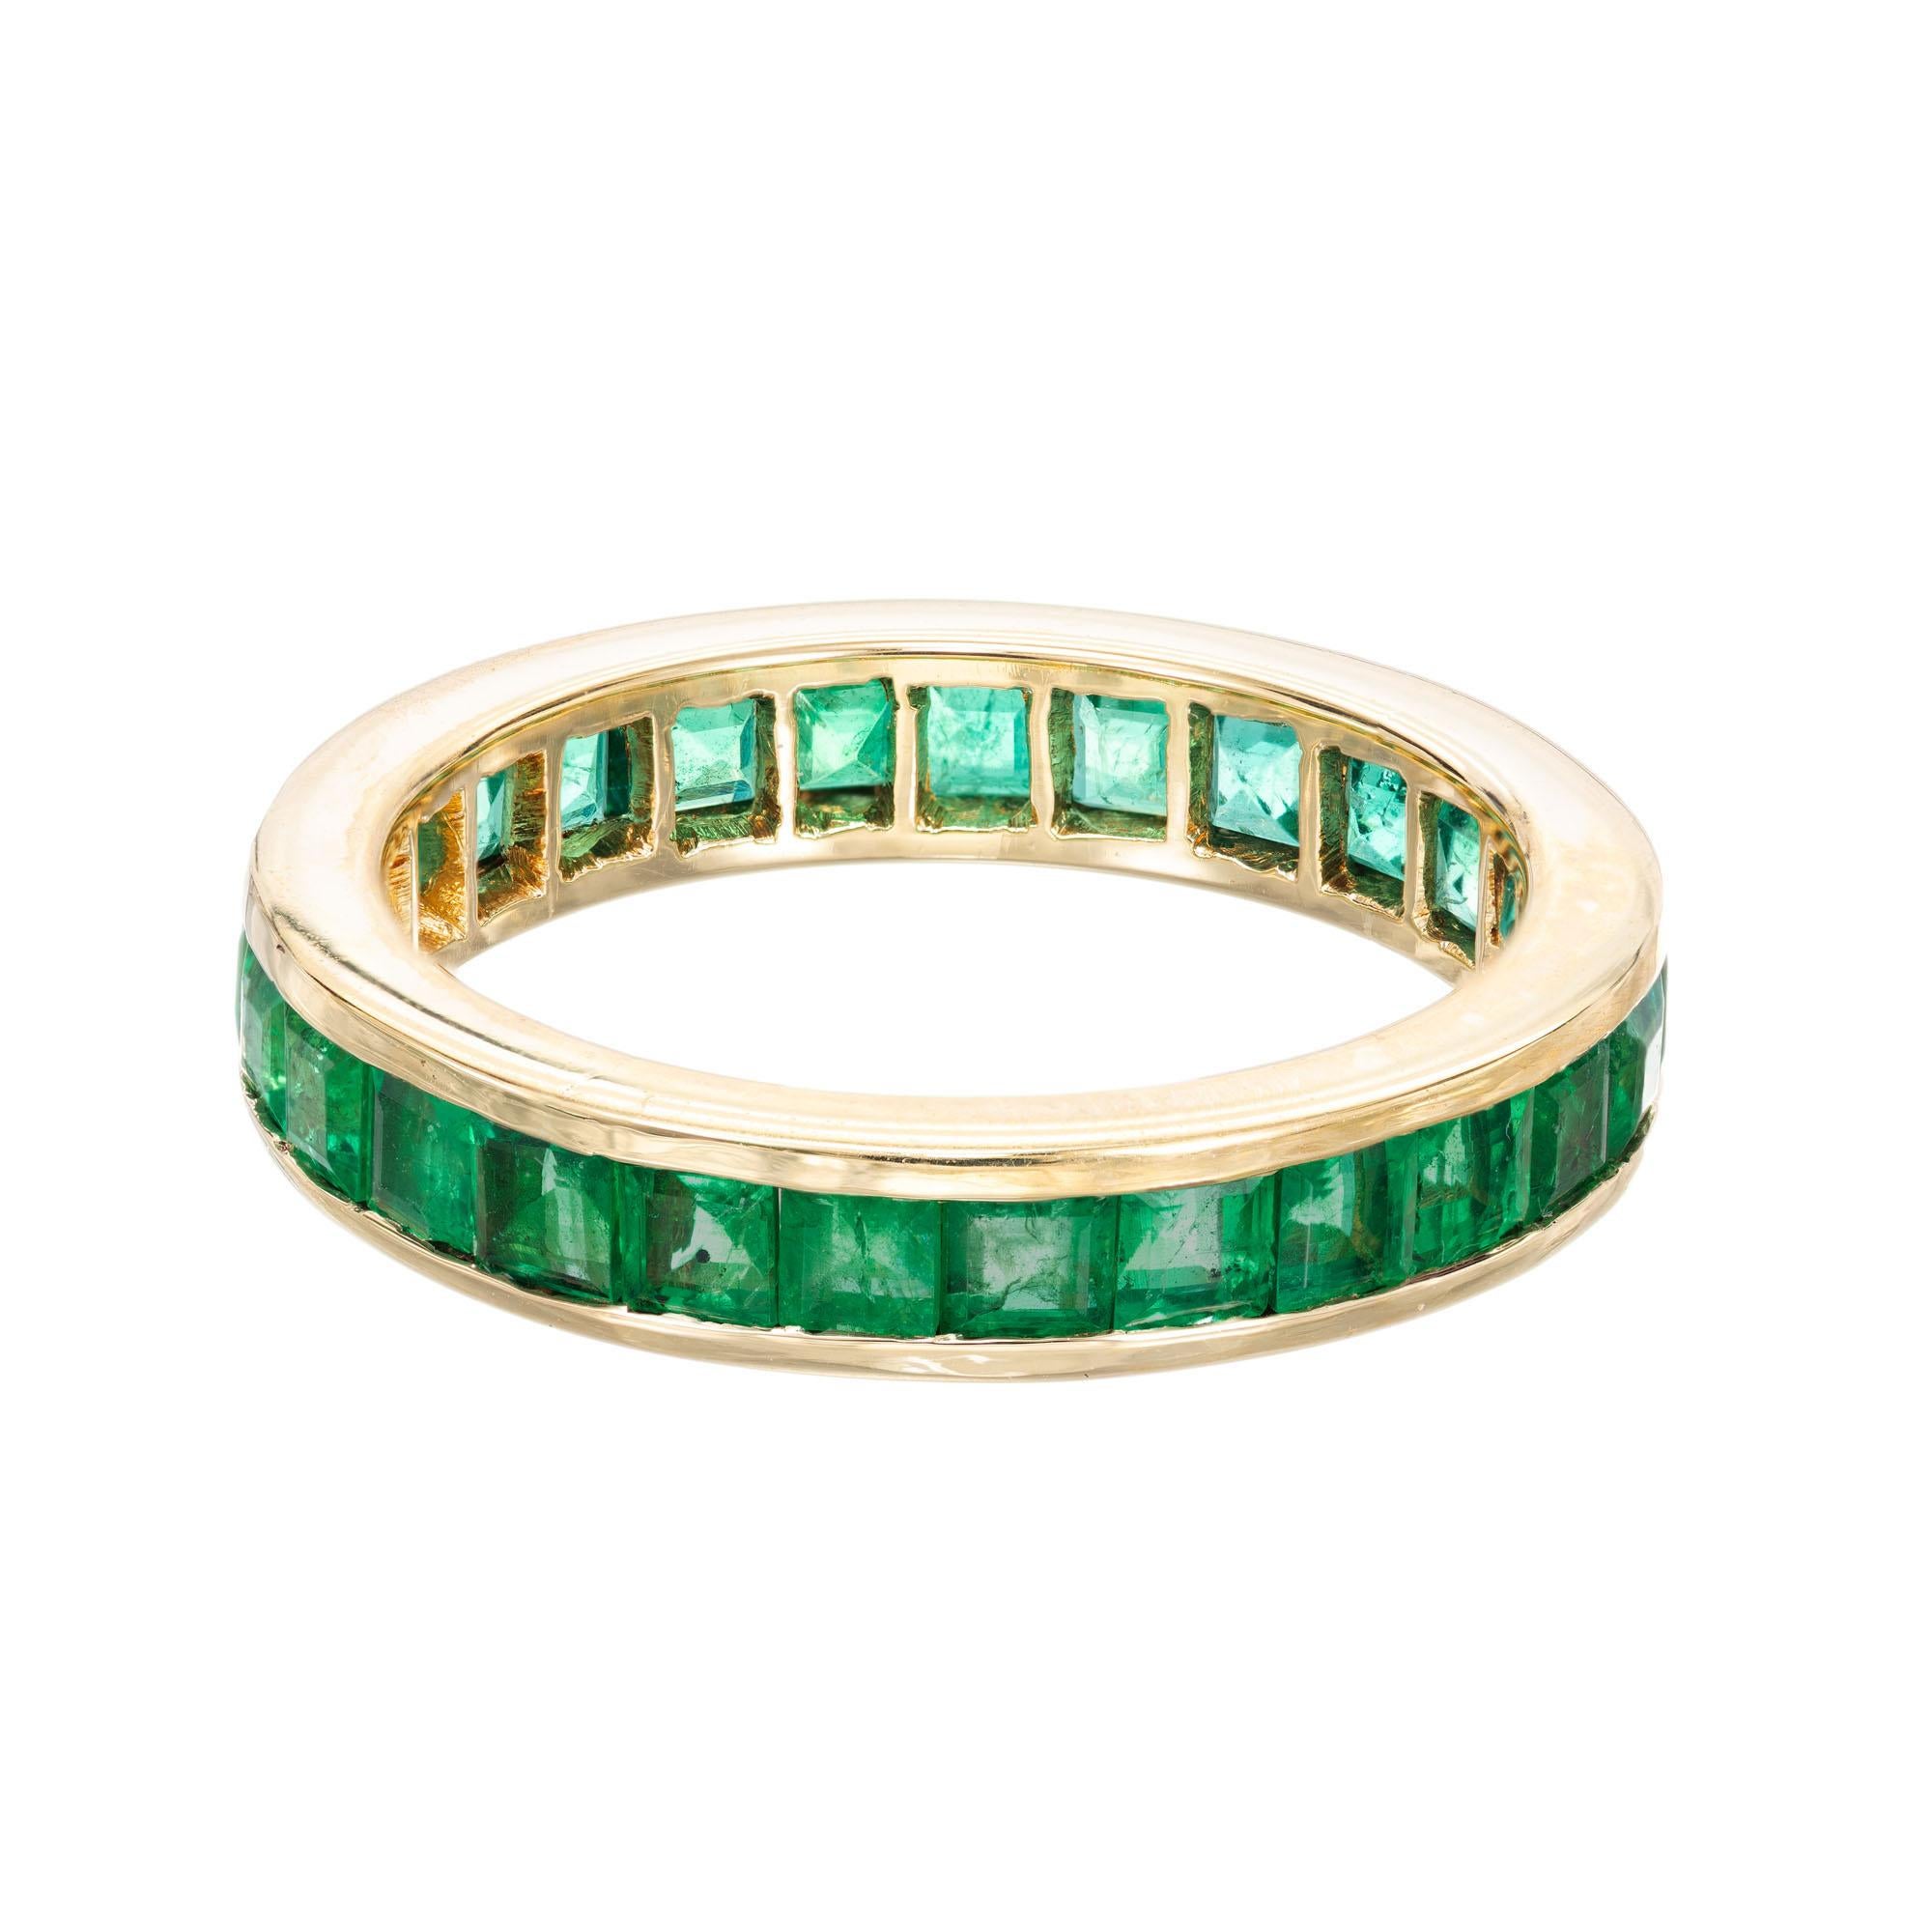 GIA certified bright green square step cut emerald eternity ring. 26 channel set square cut emeralds, in a 18k yellow gold setting. GIA certified natural emerald. CE F1

26 step square cut green emeralds, MI approx. 2.50cts Natural Emerald GIA